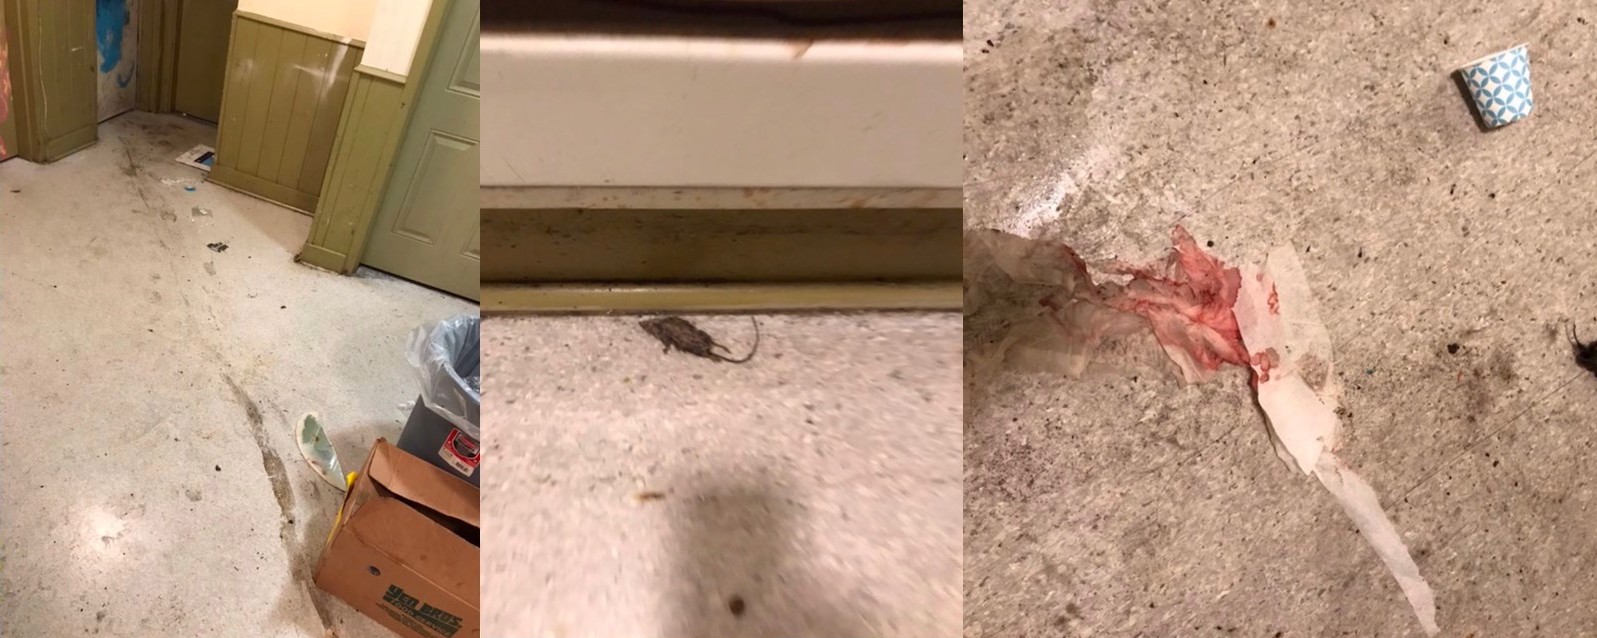 Three photos side by side. From left: a dirt-covered hallway floor; a dead mouse by a wall; and blood-soaked toilet paper on a filthy floor.